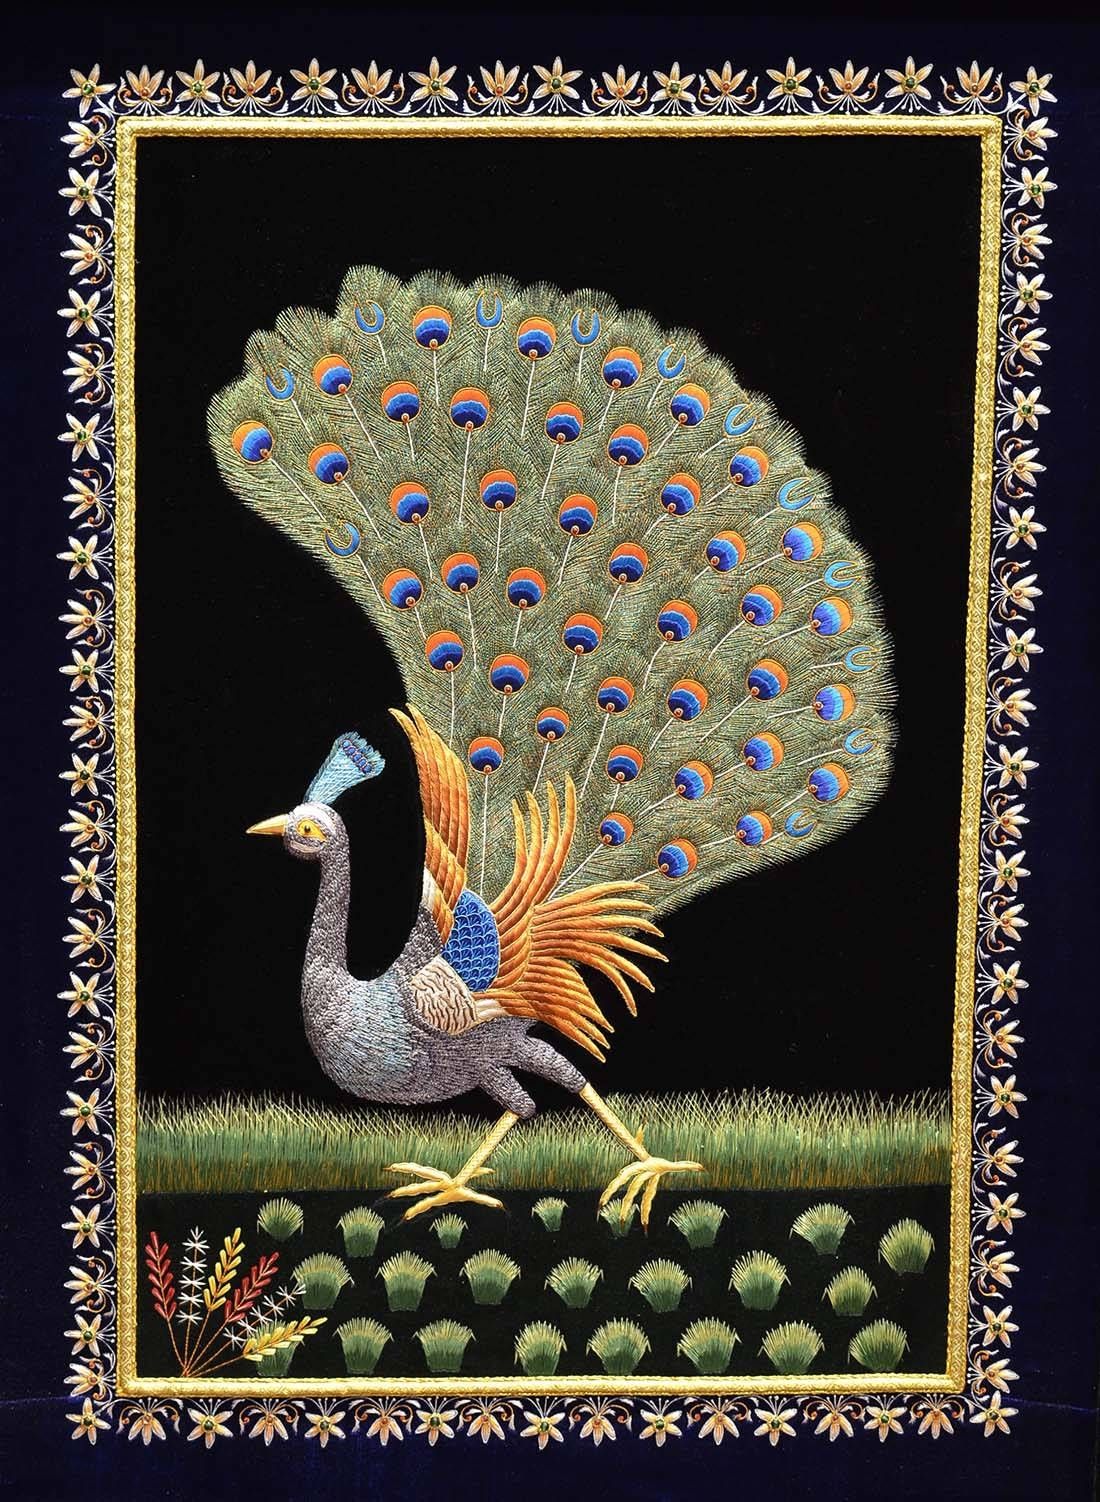 Peacock Wall Art Decorative Panel Jewel Art Tapestrykashmir Fine Within Best And Newest Jeweled Peacock Wall Art (View 1 of 20)